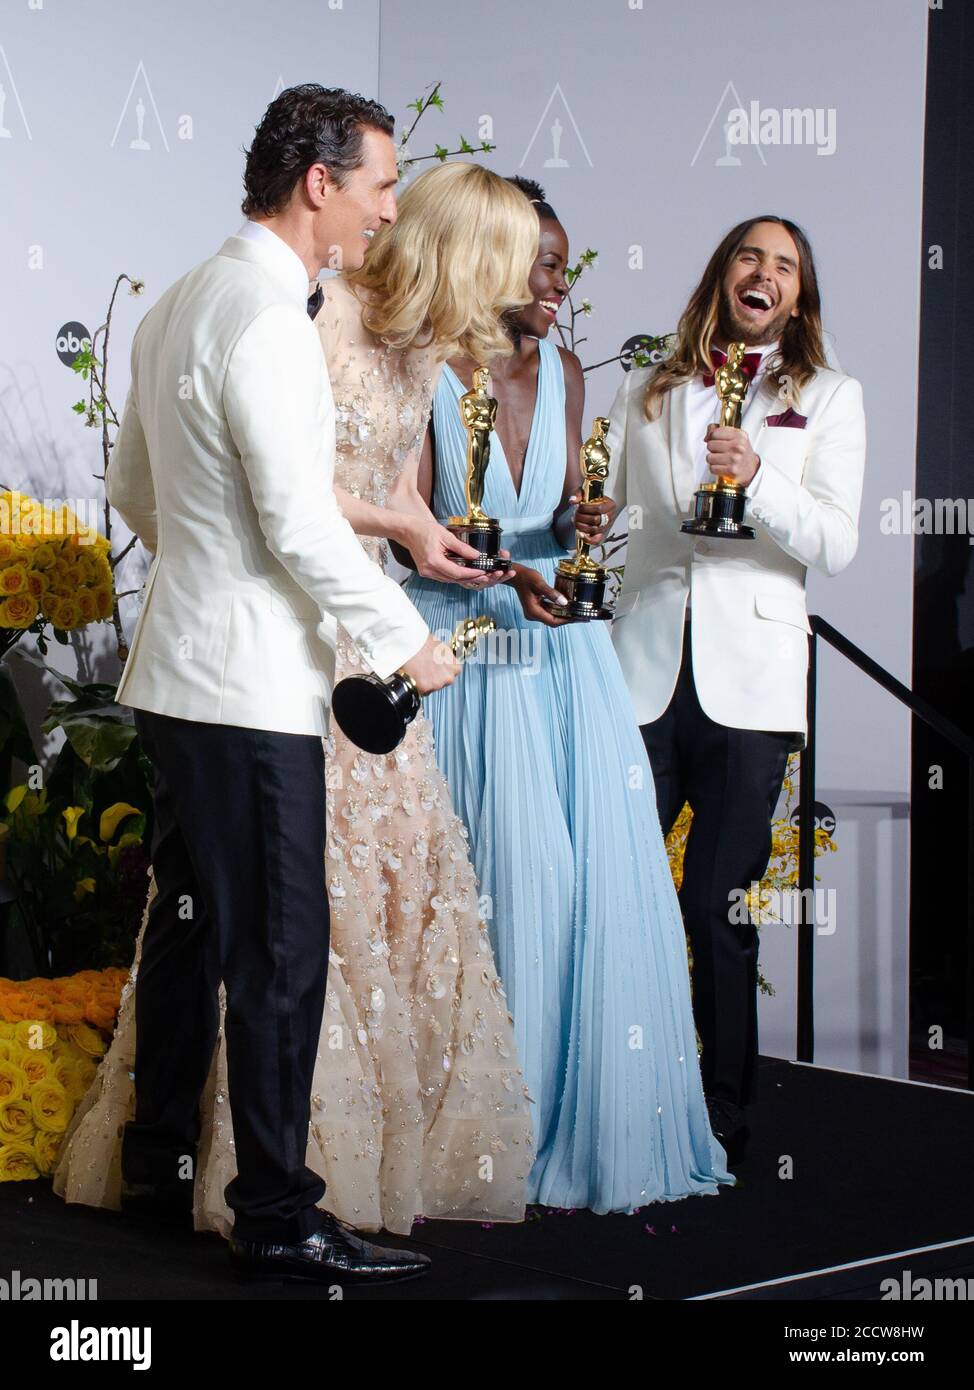 March 2, 2014, Hollywood, California, USA: Matthew McCaughey, Cate Blanchett, Lupita Nyong'o and Jerod Leto pose in the press room during the Oscars at Loews Hollywood Hotel. (Credit Image: © Billy Bennight/ZUMA Wire) Stock Photo